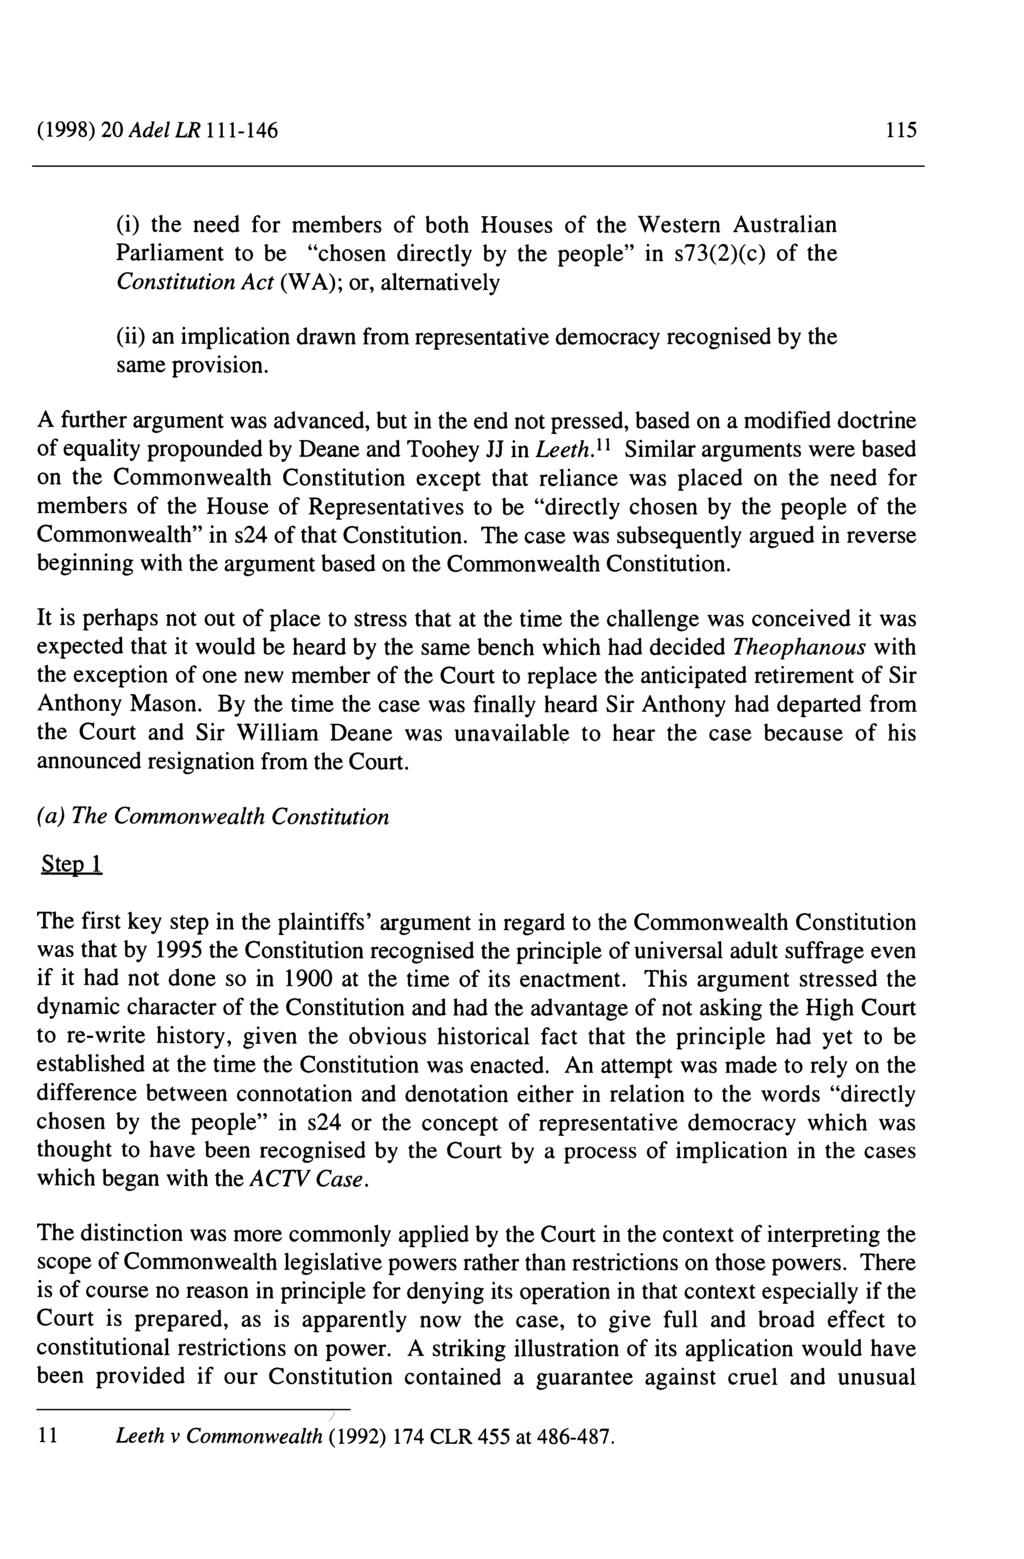 (i) the need for members of both Houses of the Western Australian Parliament to be "chosen directly by the people" in s73(2)(c) of the Constitution Act (WA); or, alternatively (ii) an implication